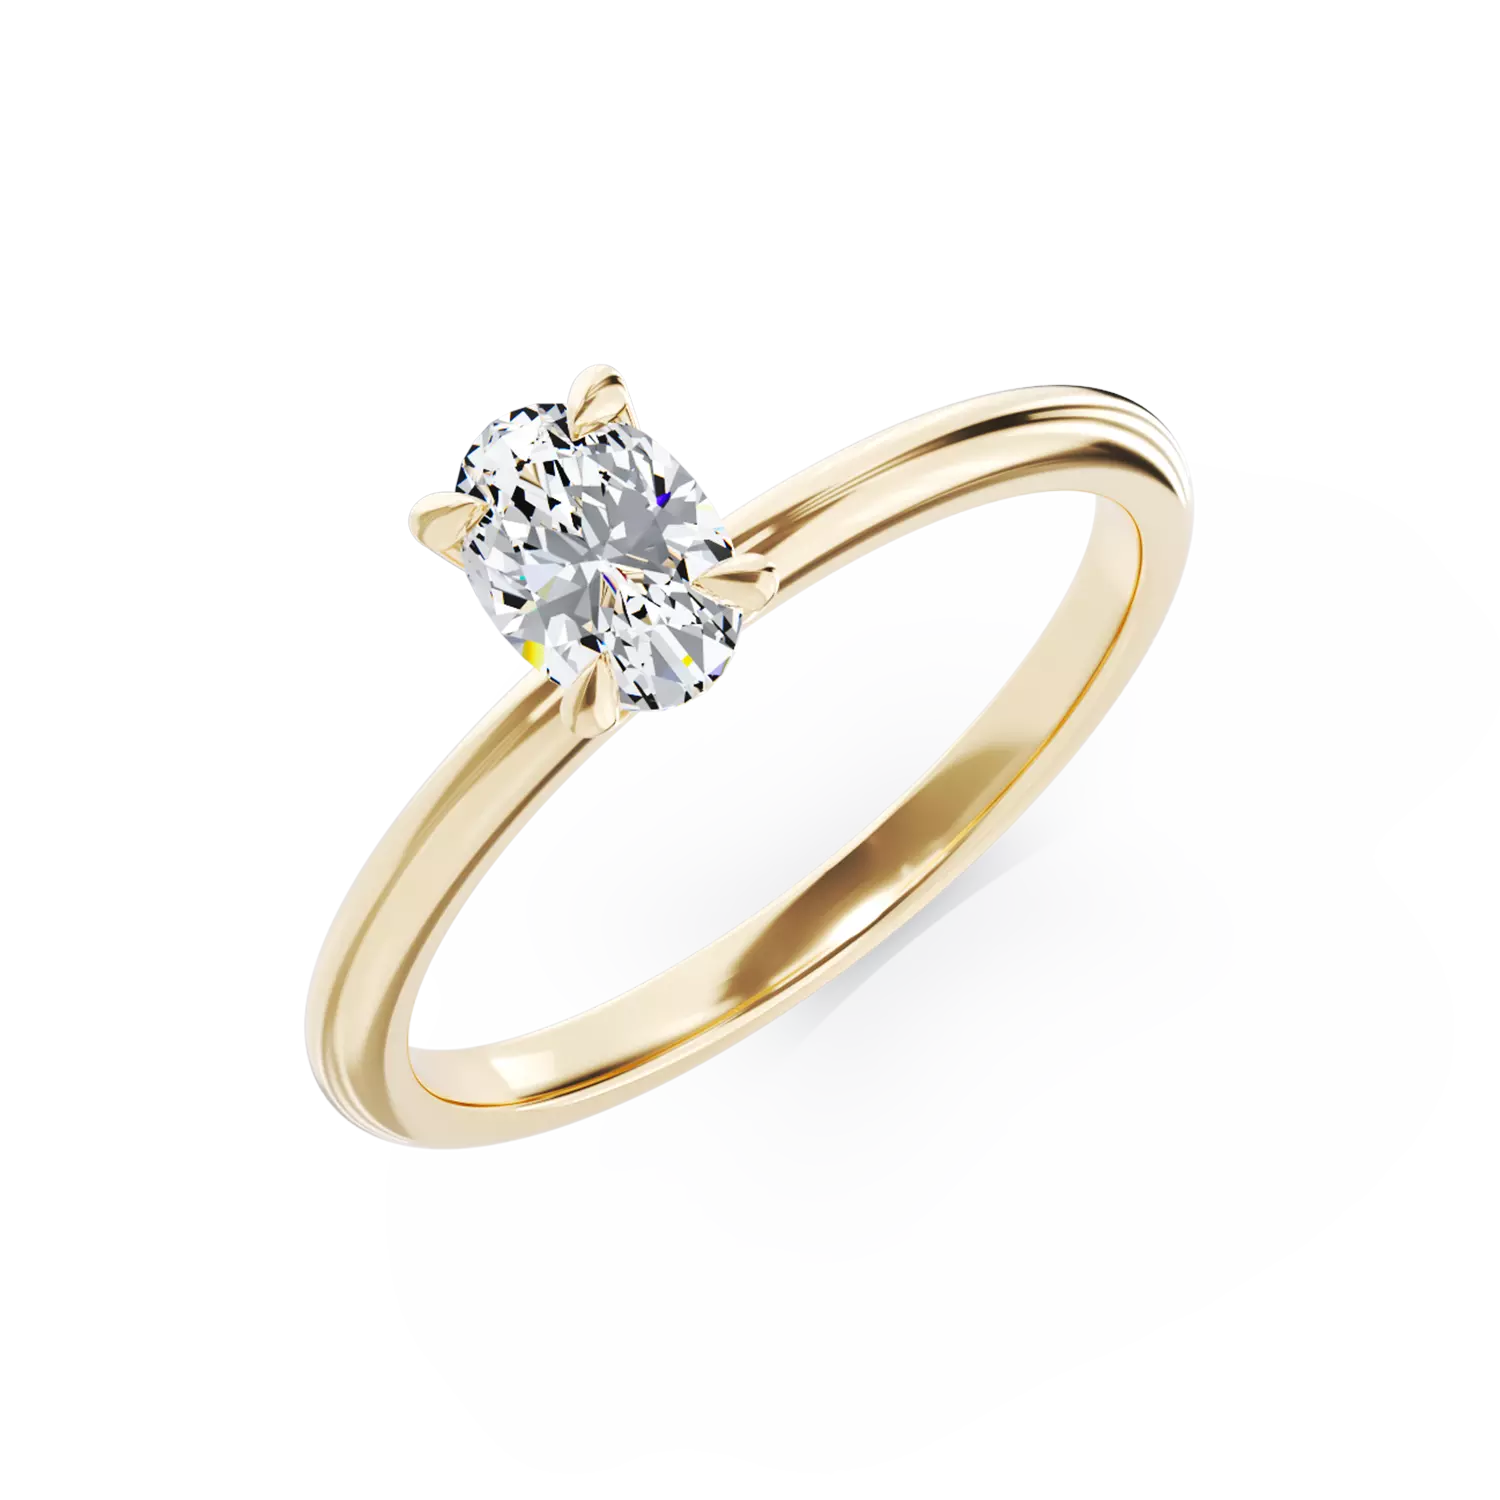 18K yellow gold engagement ring with 0.4ct solitaire diamond